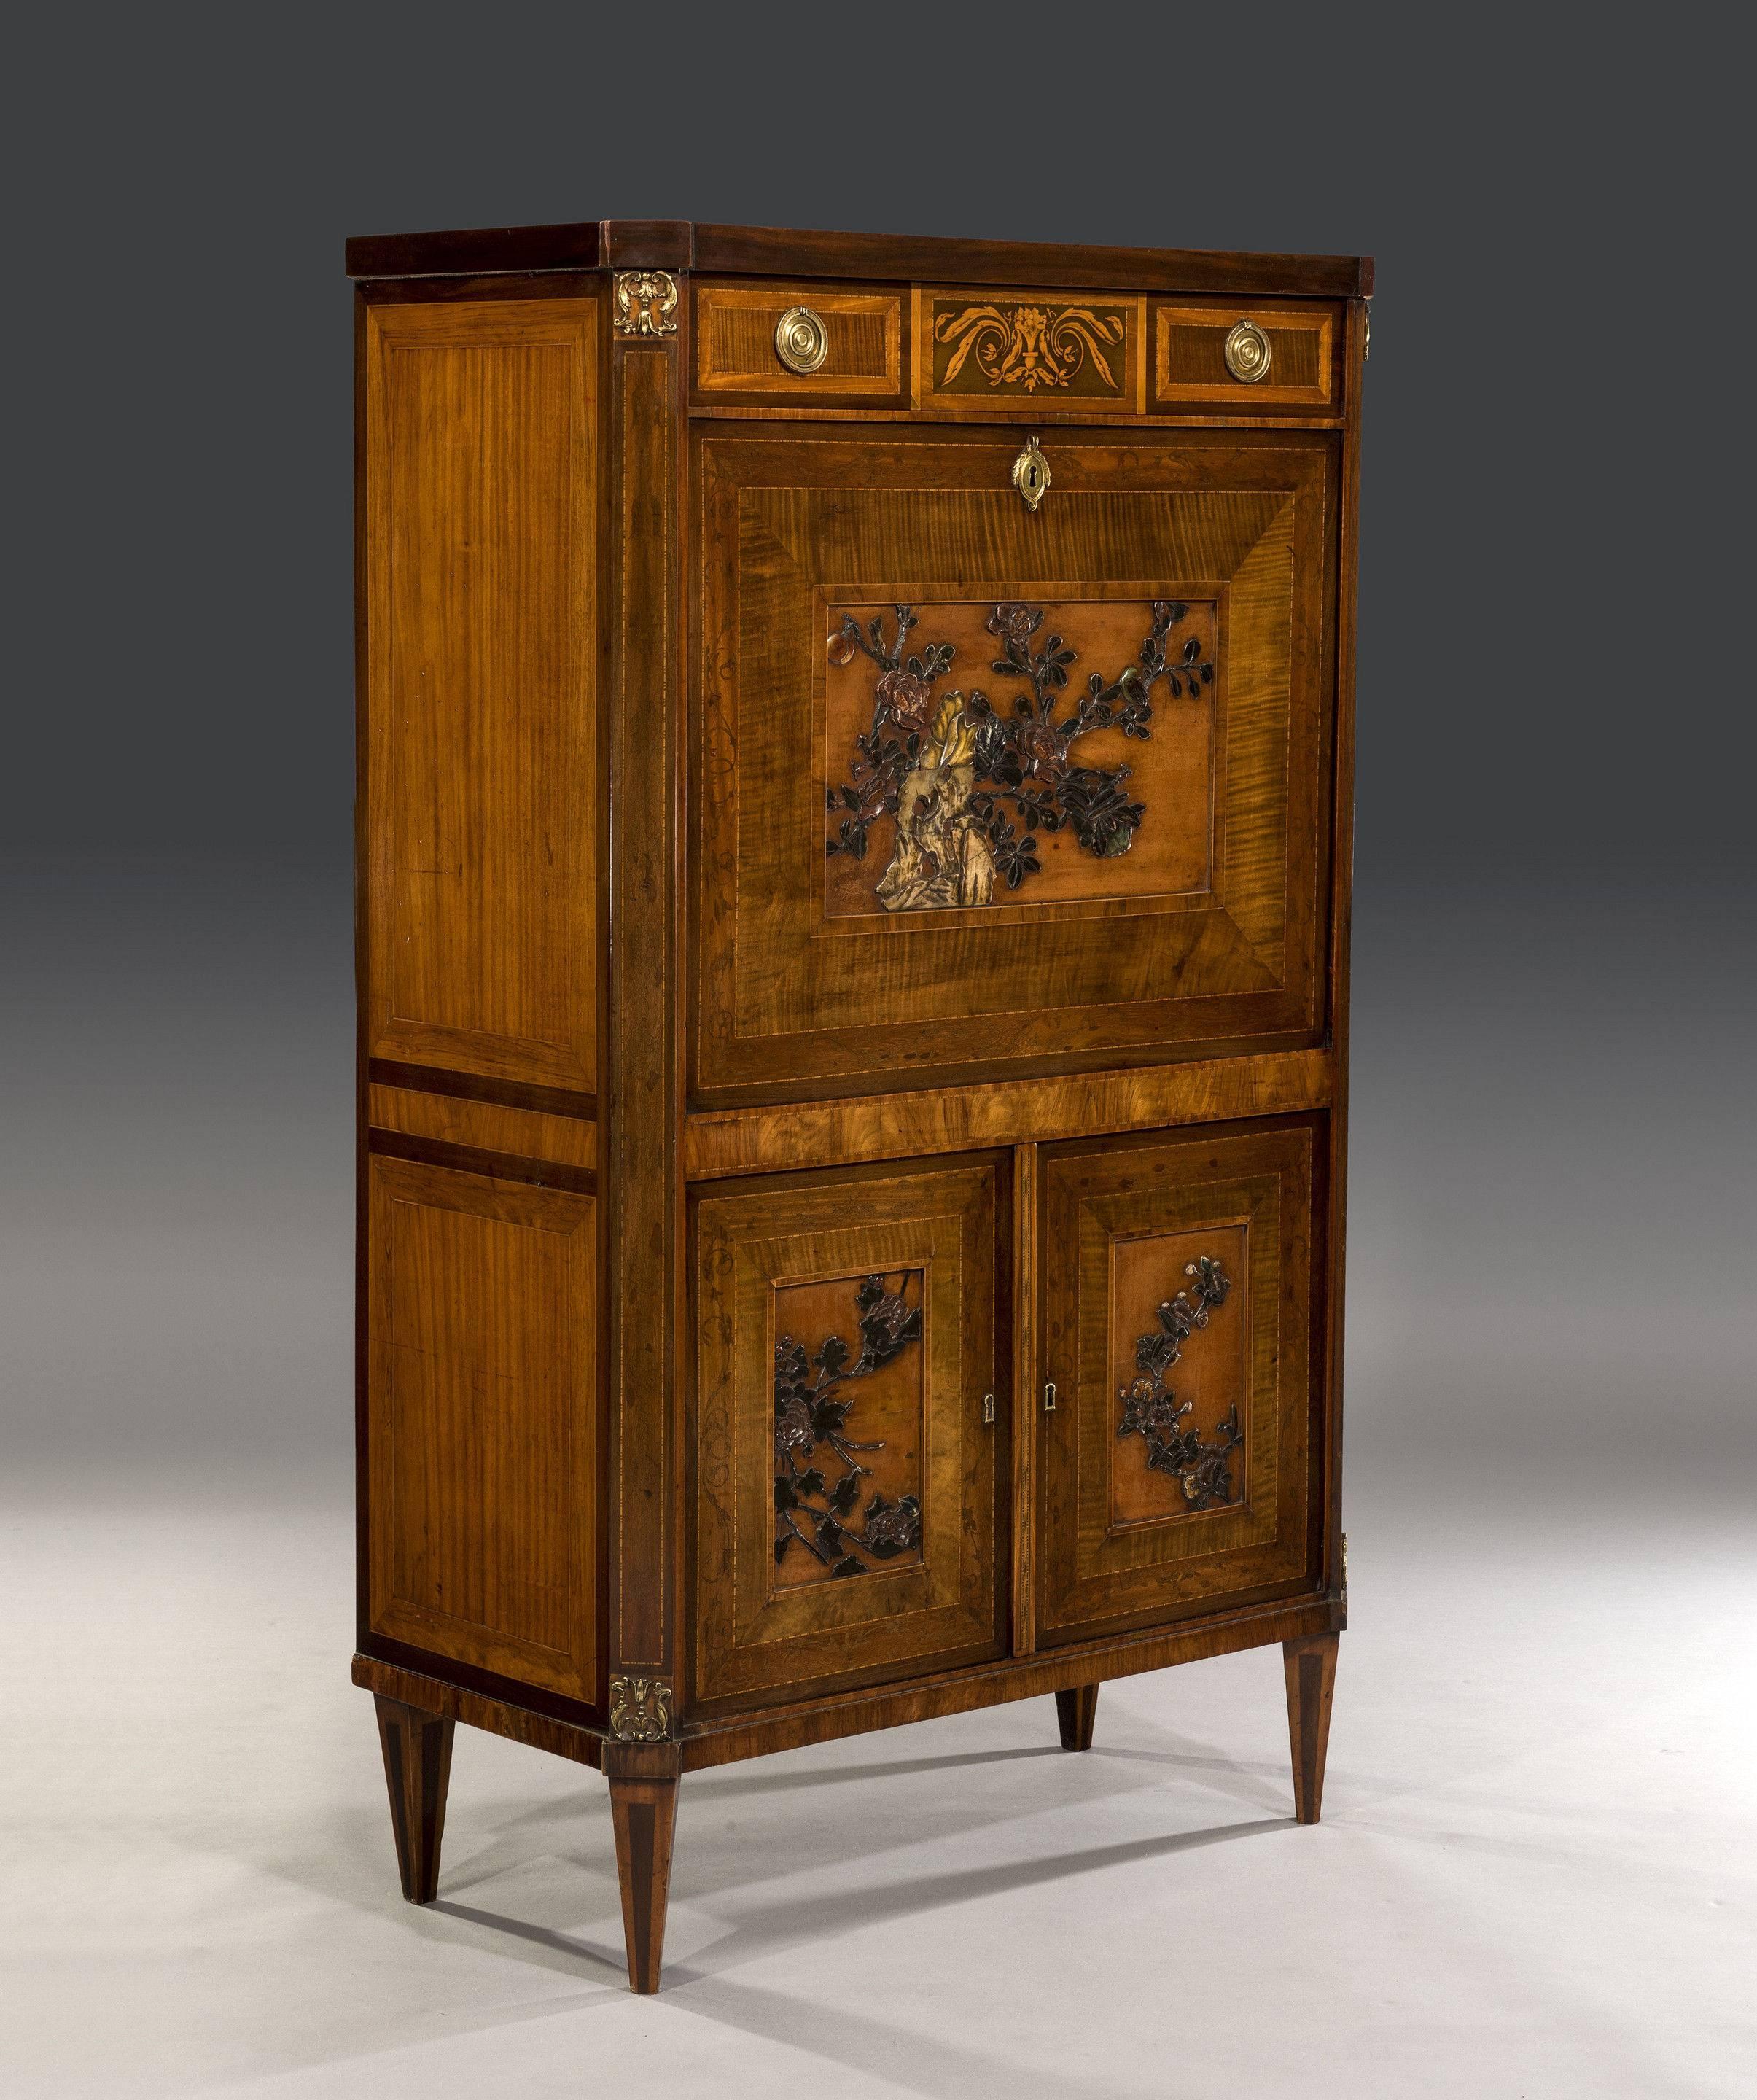 The mahogany top sits above a single drawer that is highly decorated with an inlaid centre panel which is flanked by two cross-banded smaller panels with brass ringed handles. The escritoire's fall is cross-banded and inlaid with floral scrolls and